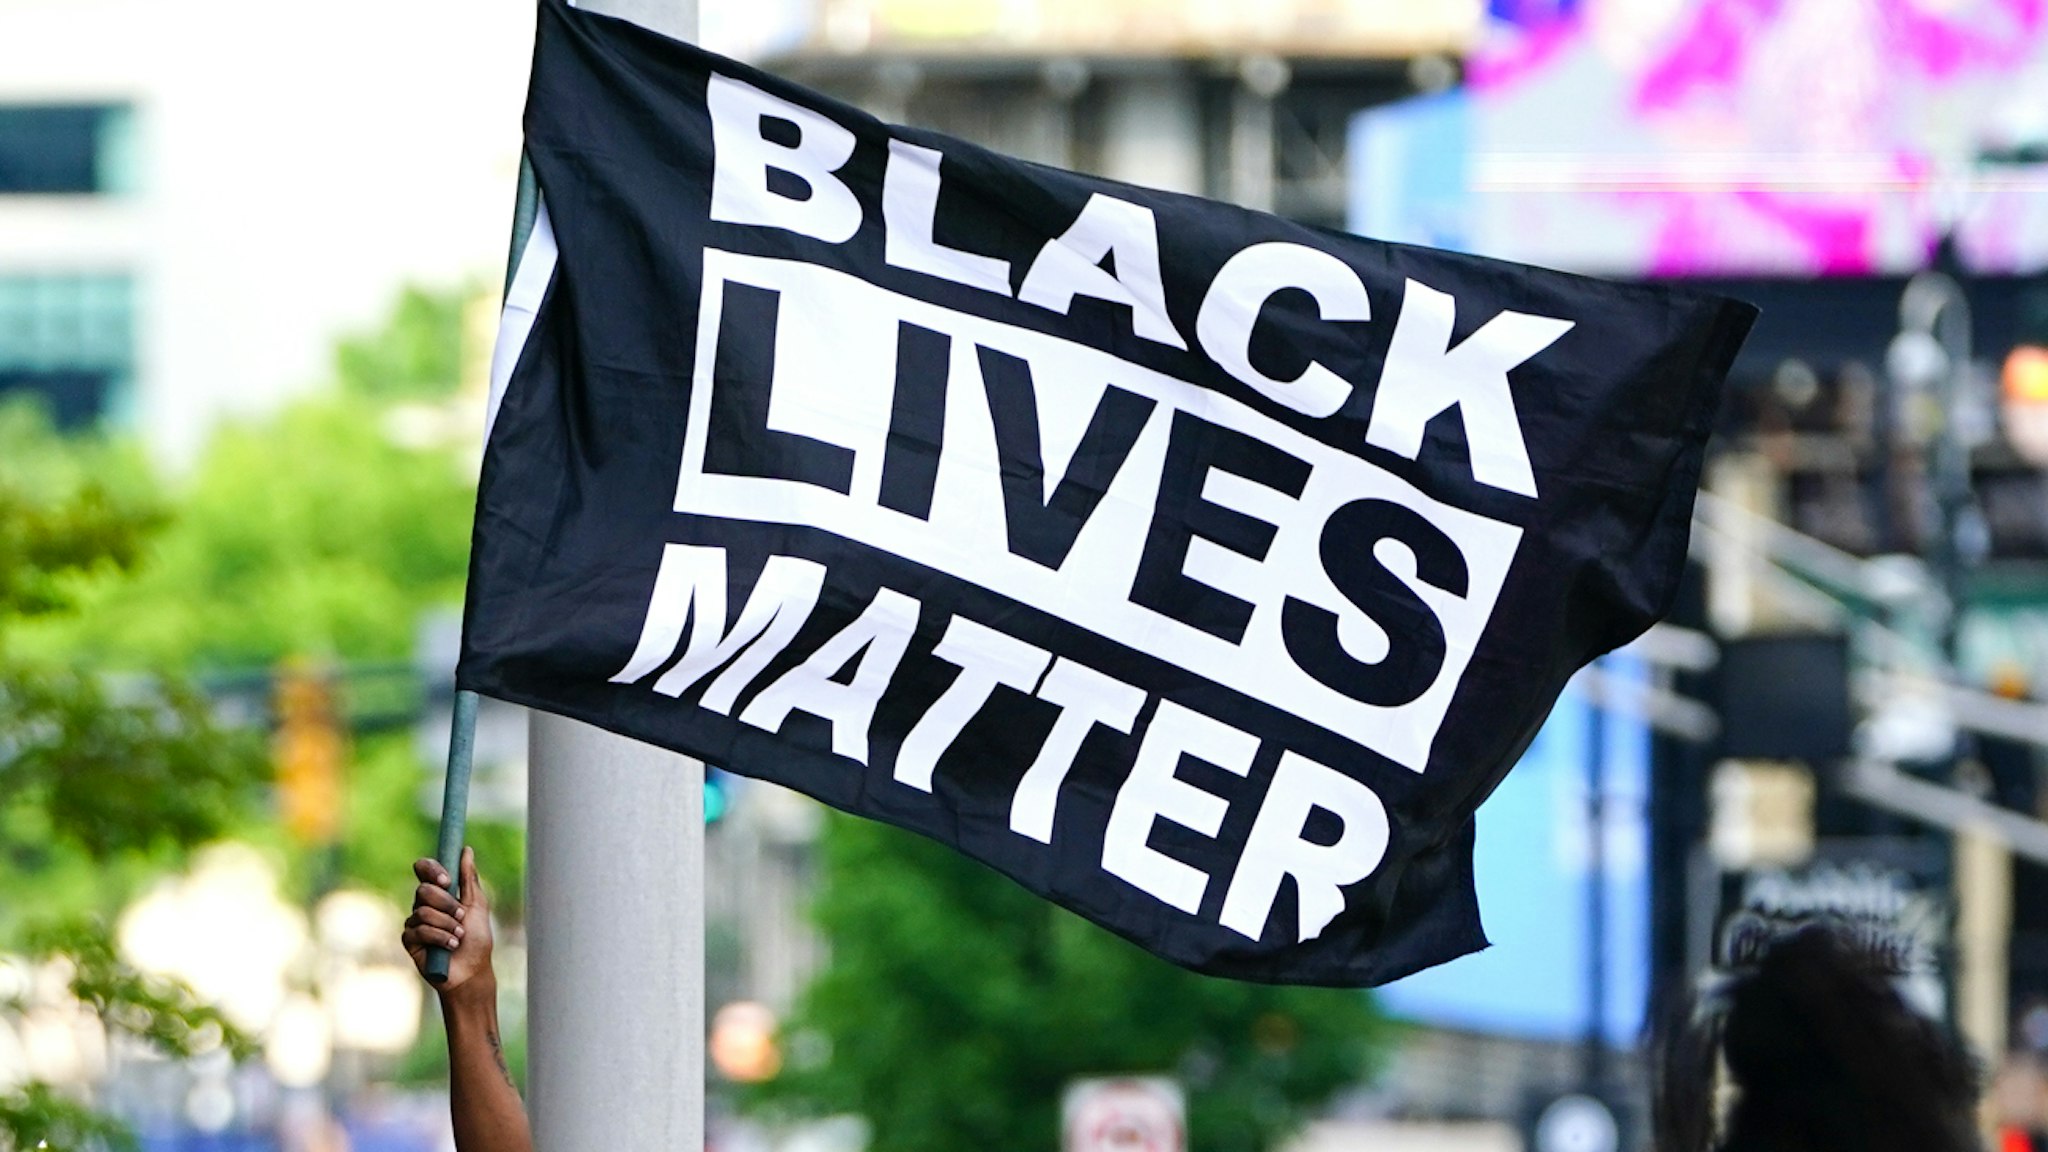 ATLANTA, GA - MAY 29: A man waves a Black Lives Matter flag during a protest on May 29, 2020 in Atlanta, Georgia. Demonstrations are being held across the US after George Floyd died in police custody on May 25th in Minneapolis, Minnesota.